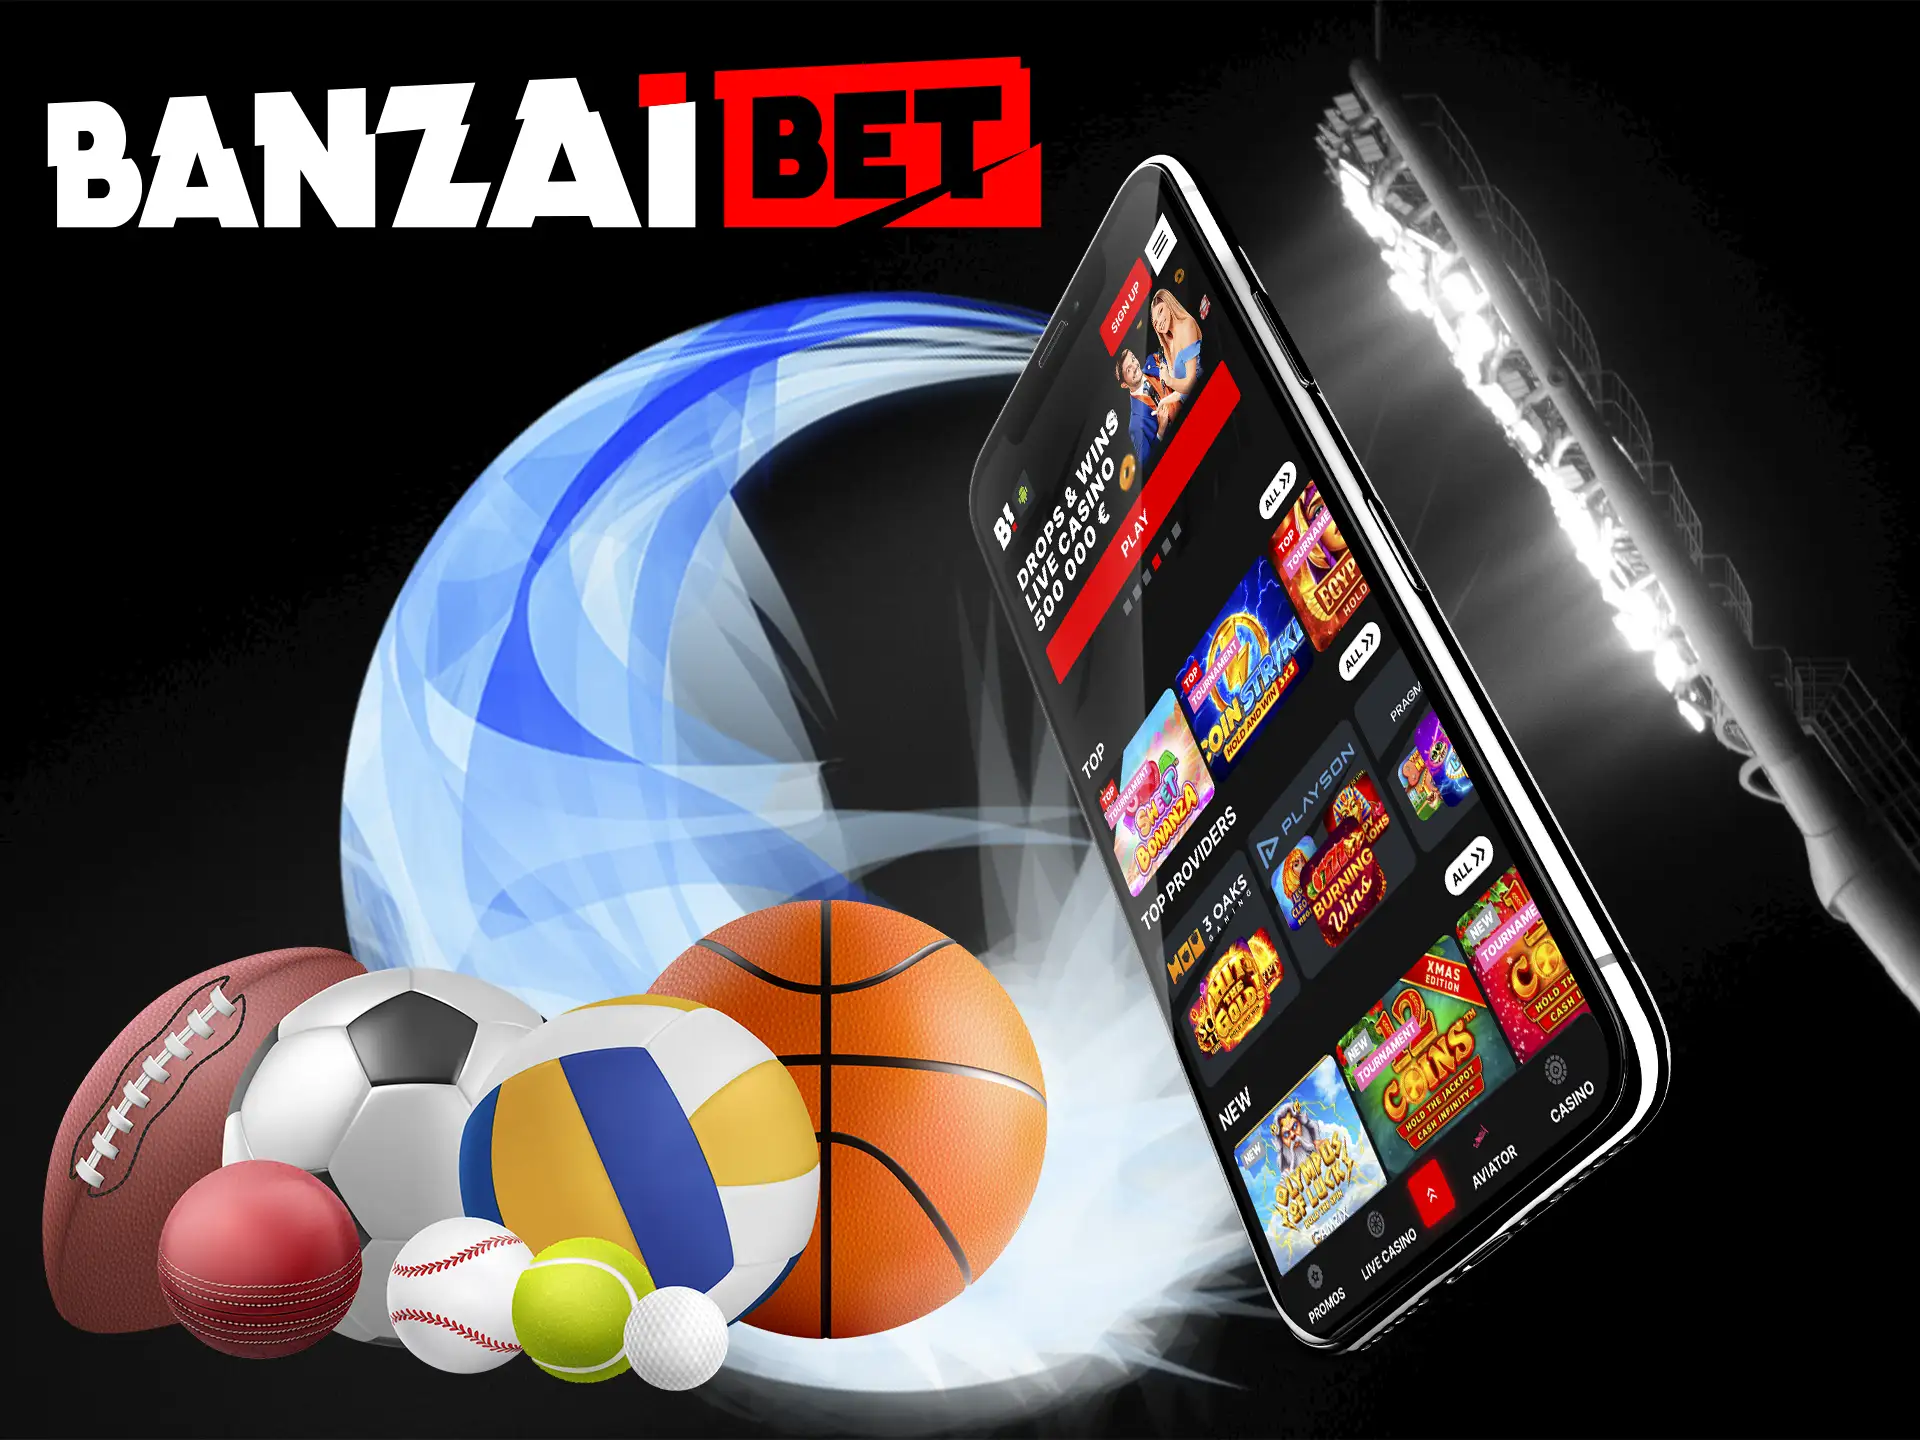 The main disciplines in this section of Banzai App are football and cricket which are very popular in Bangladesh.